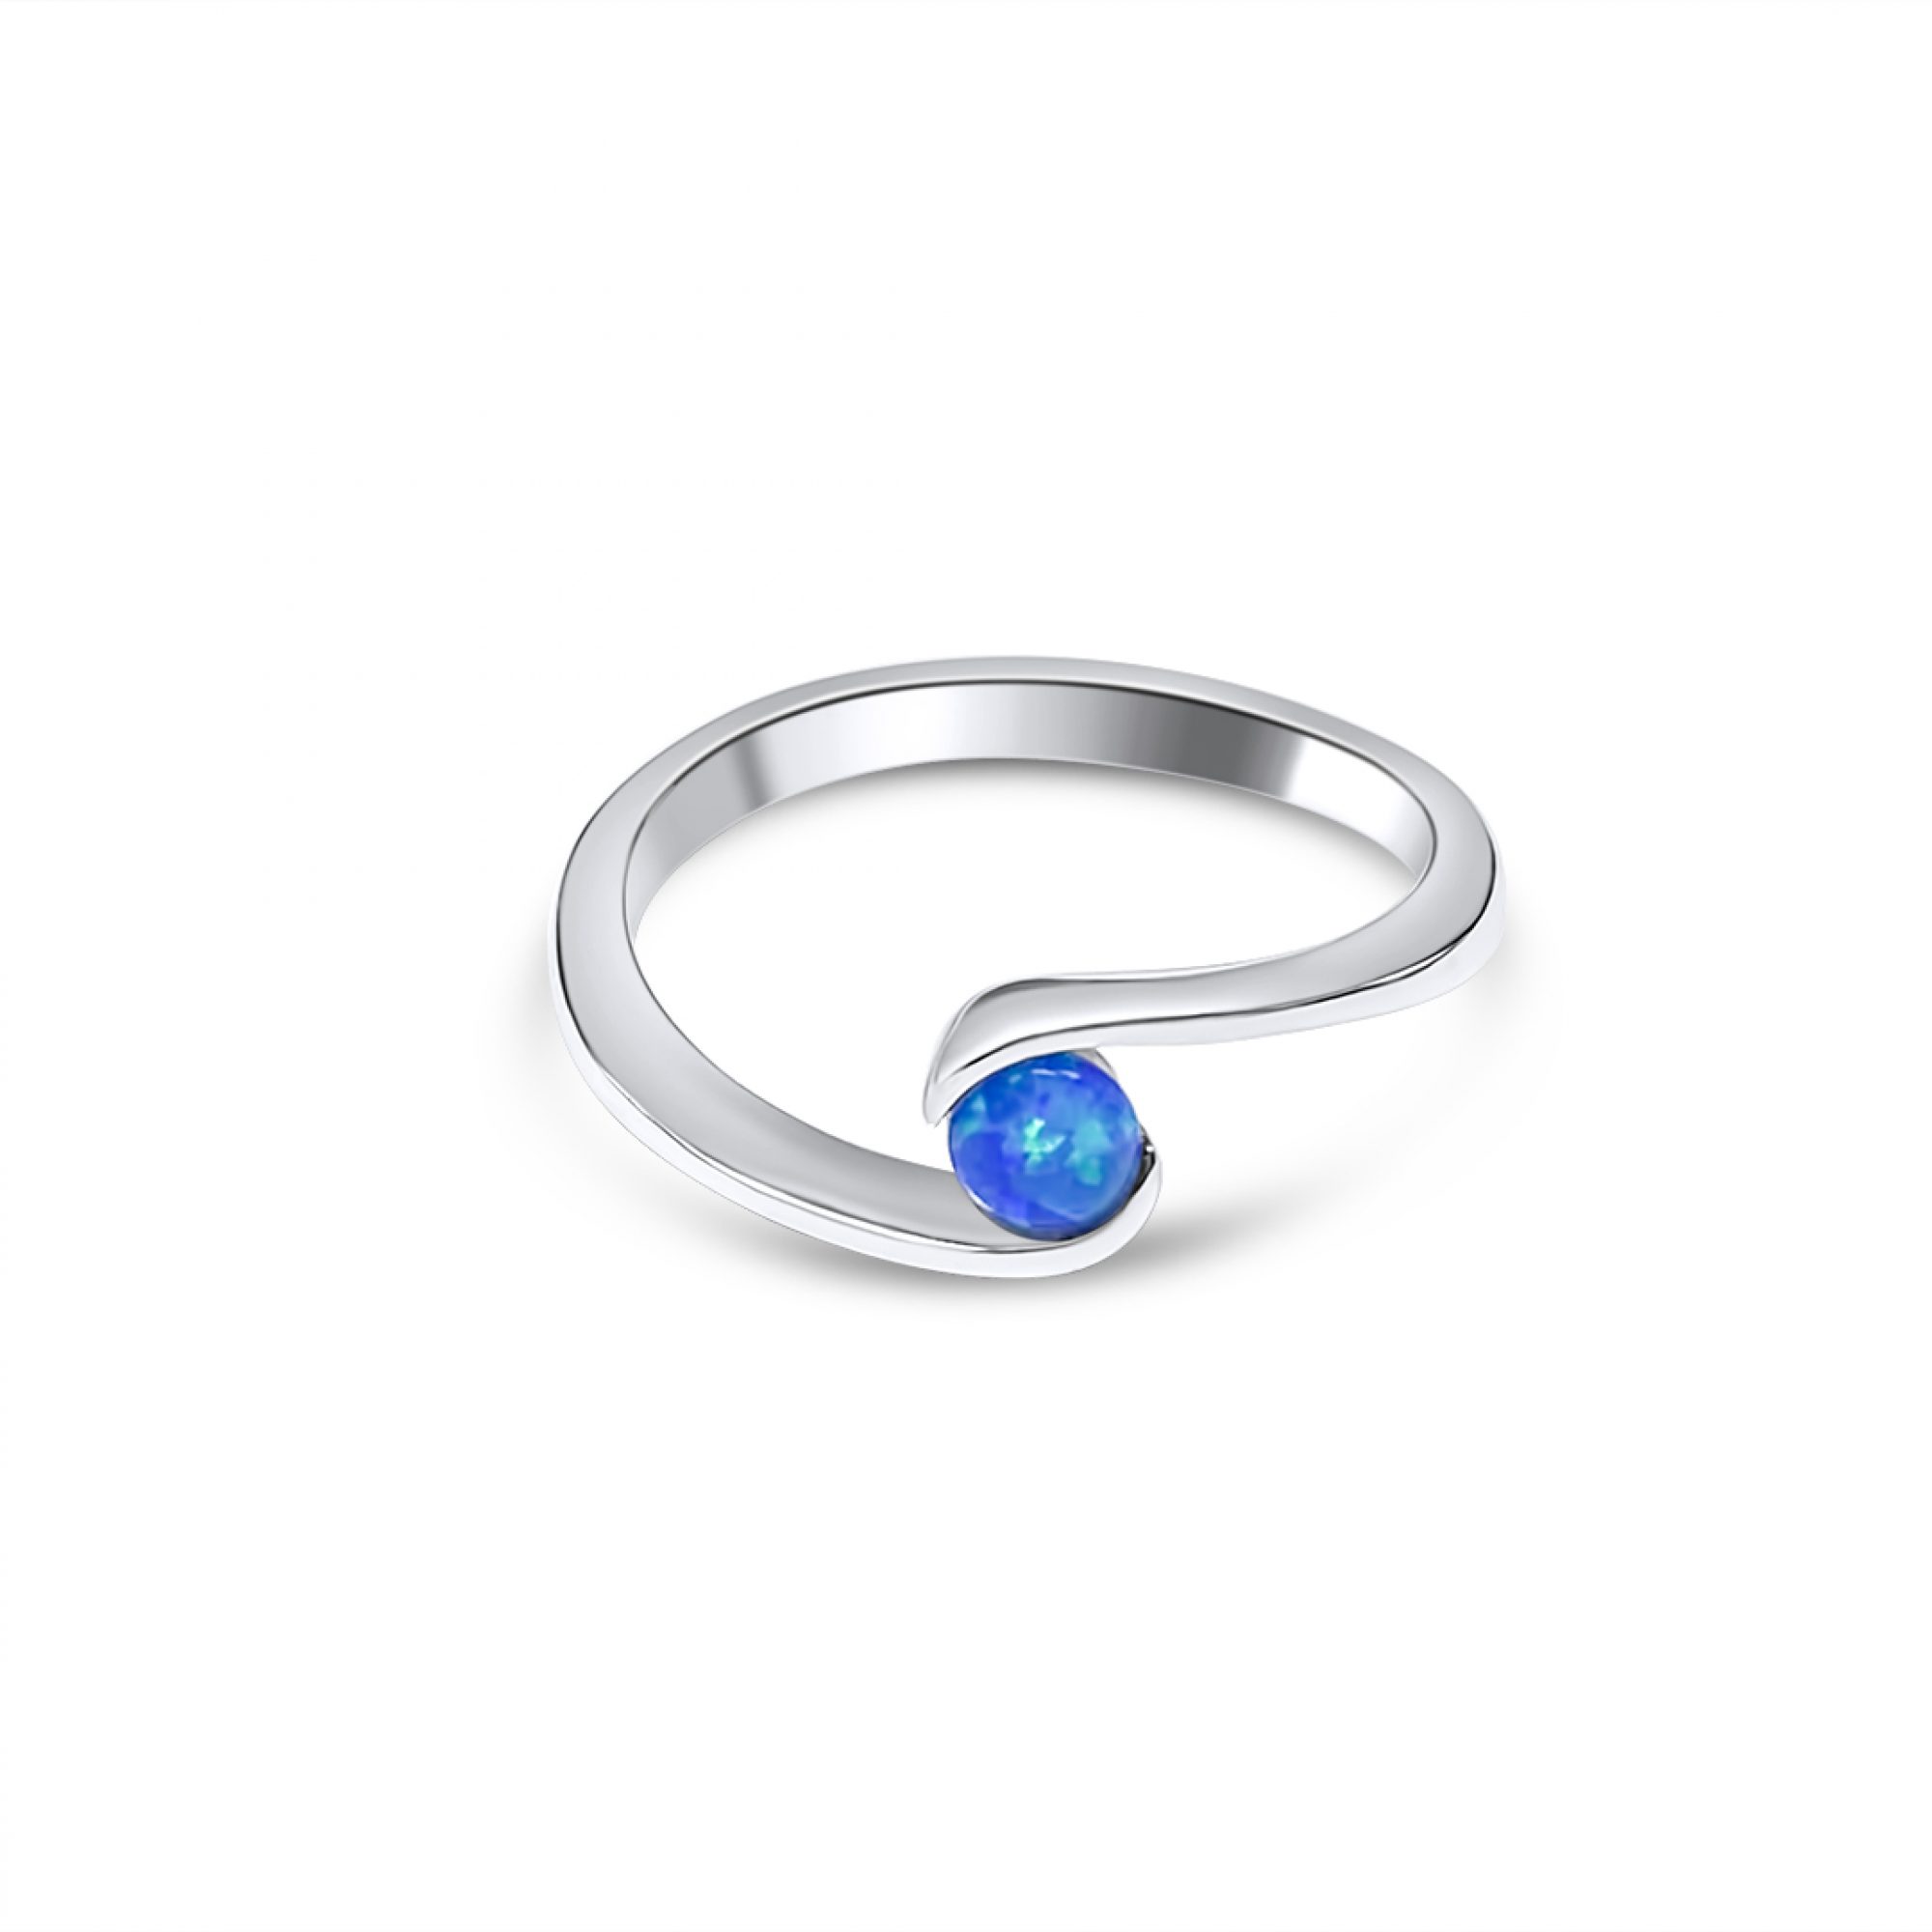 Silver ring with opal stone